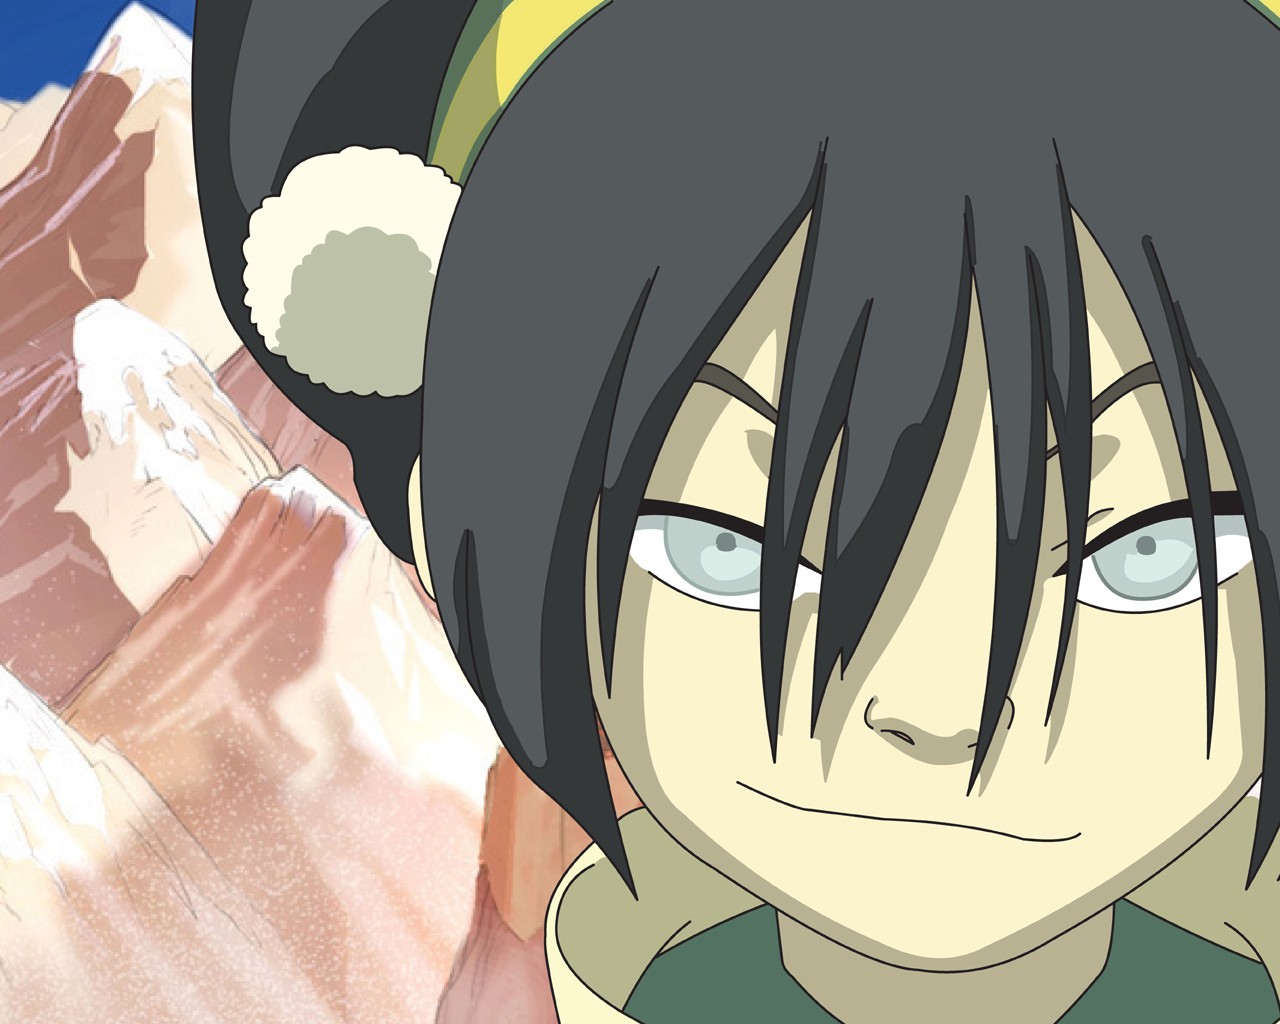 Anime 1280x1024 anime Avatar: The Last Airbender Toph Beifong